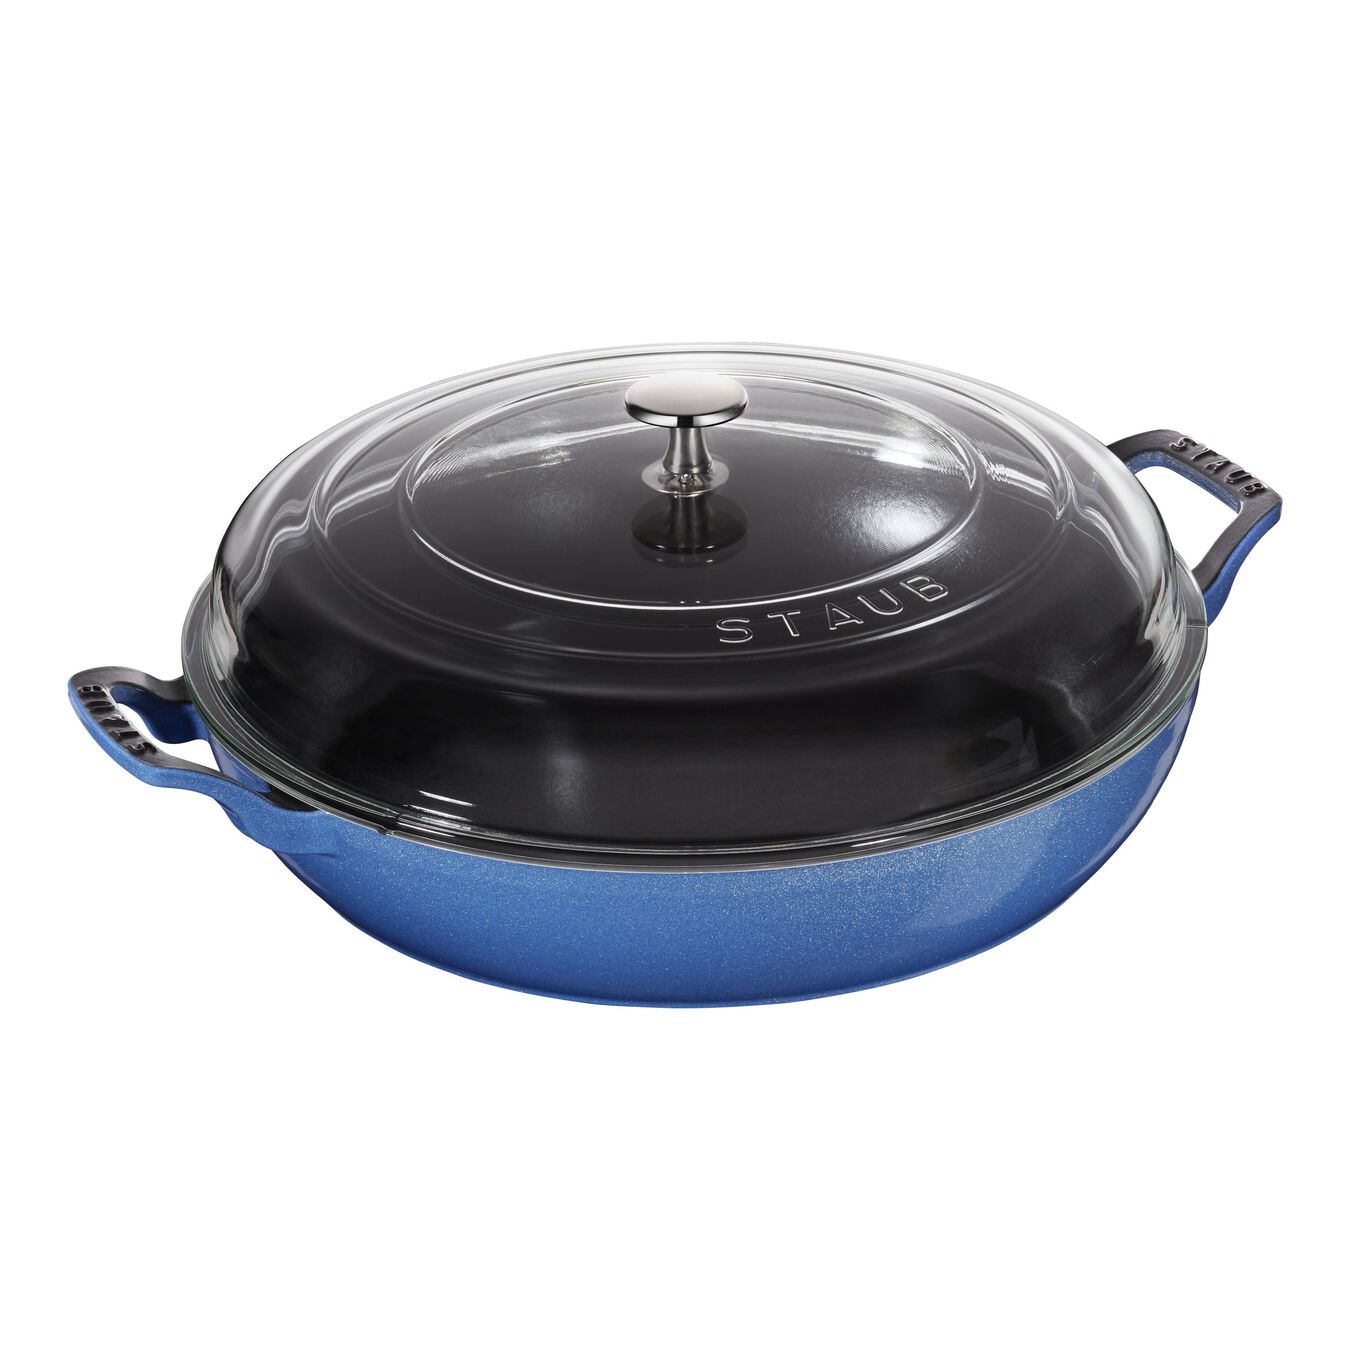 12-inch, Saute pan with glass lid, metallic blue,,large 1